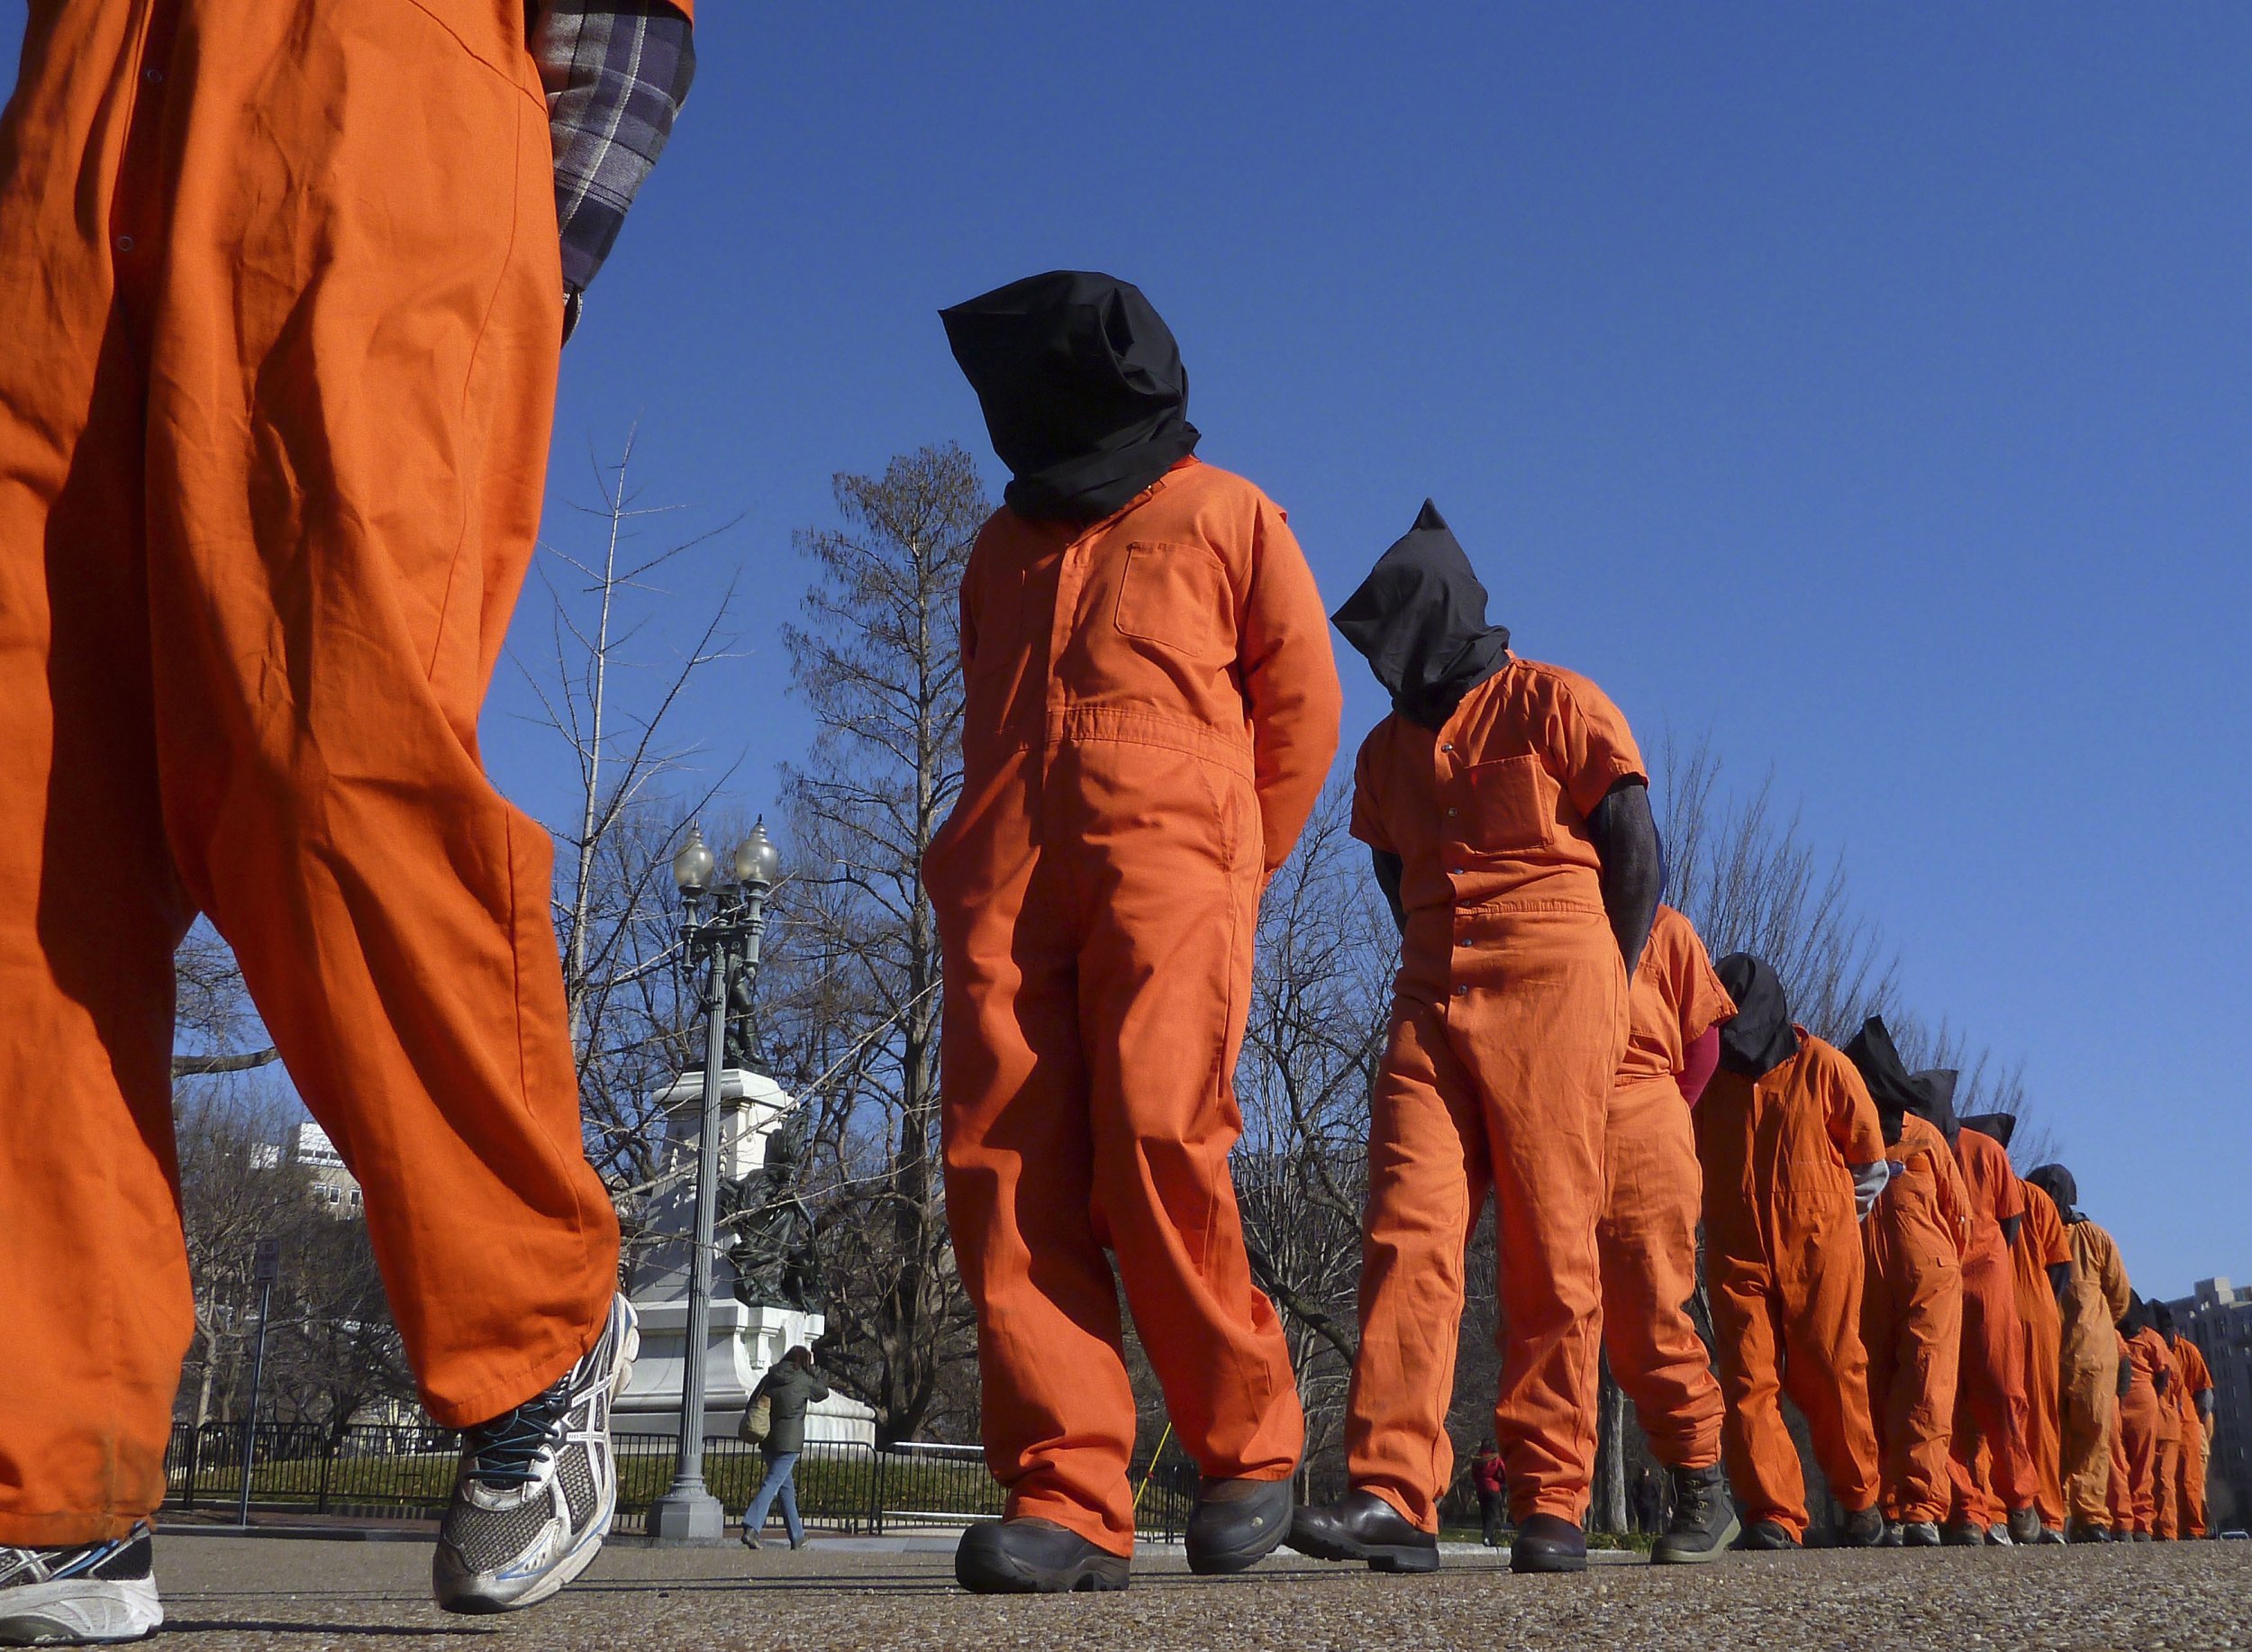 The U.S. Shouldn't Torture: Opinion